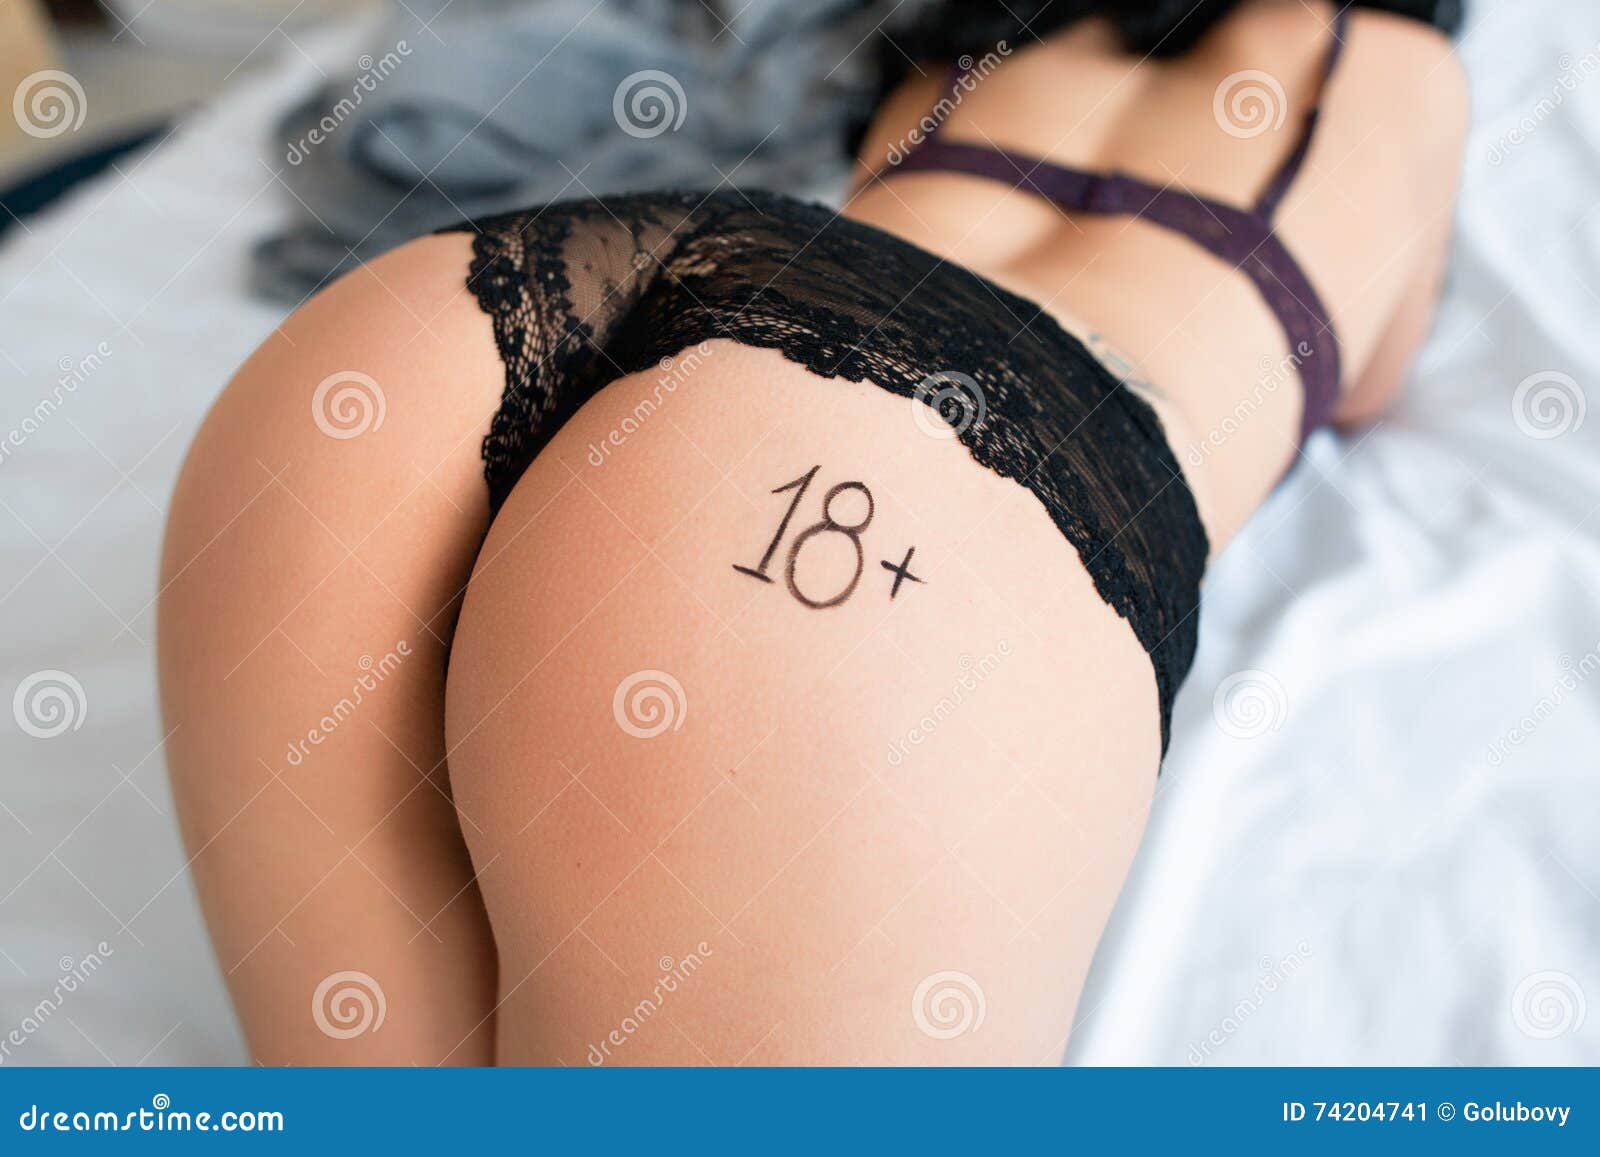 Bending Woman in Bed with Label 18plus on Stock Image